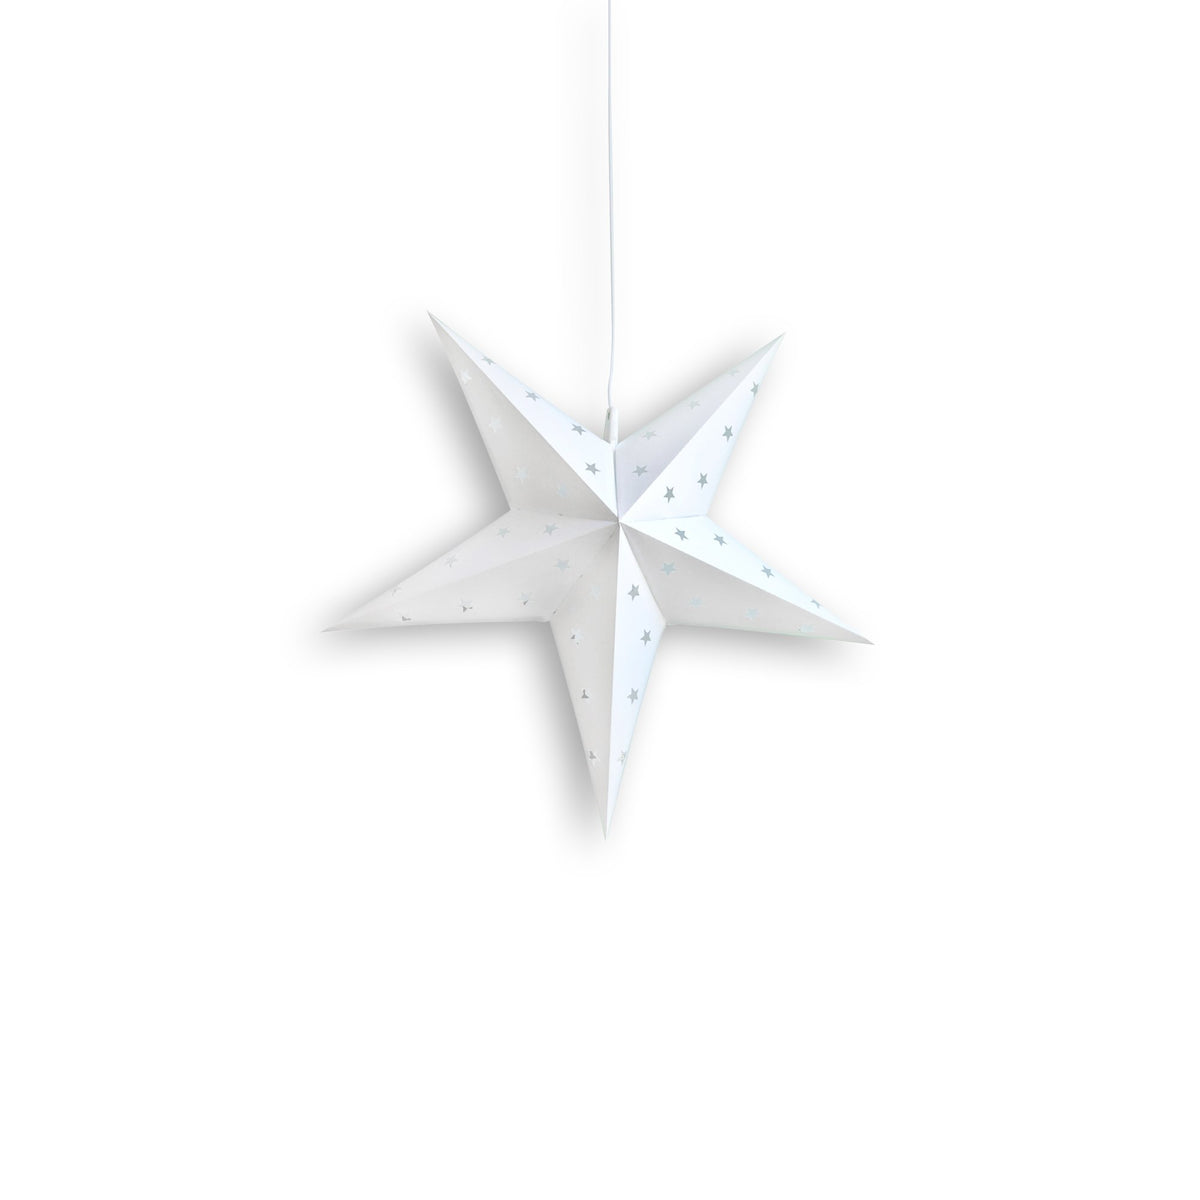 11&quot; White Weatherproof Star Lantern Lamp, Hanging Decoration (Shade Only)